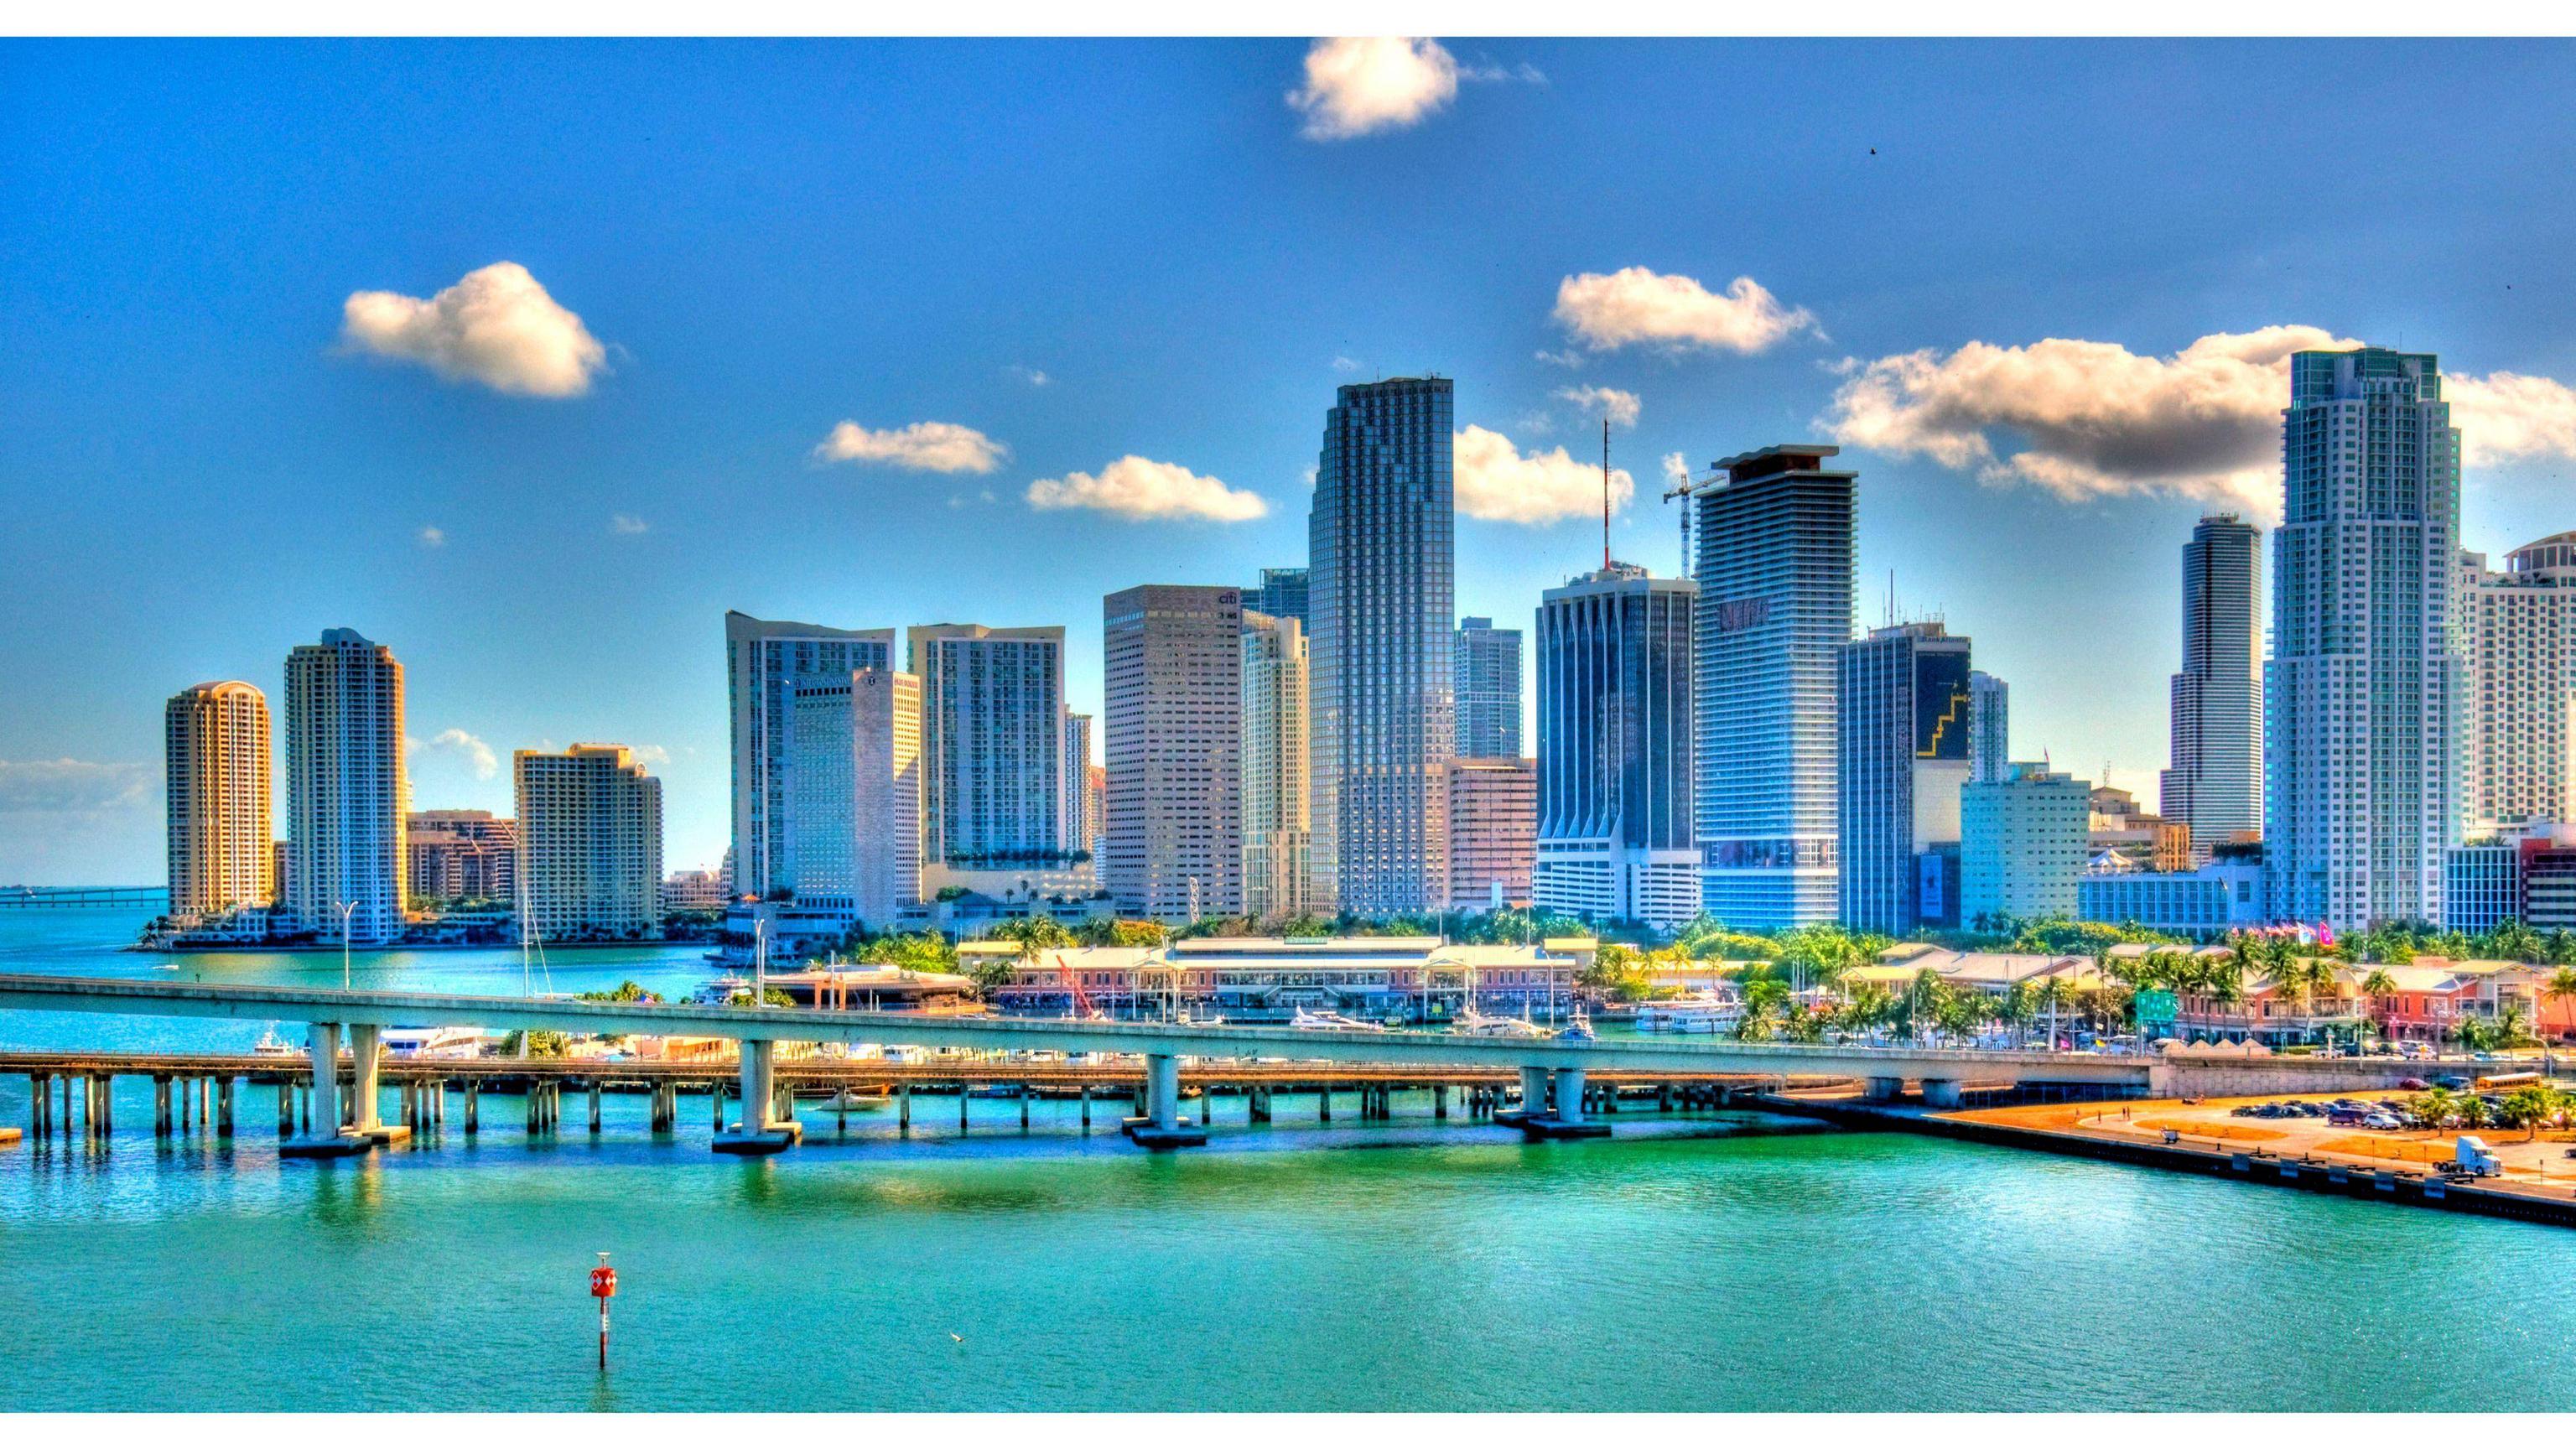 A cityscape of a downtown area with a large body of water in front of it. - Miami